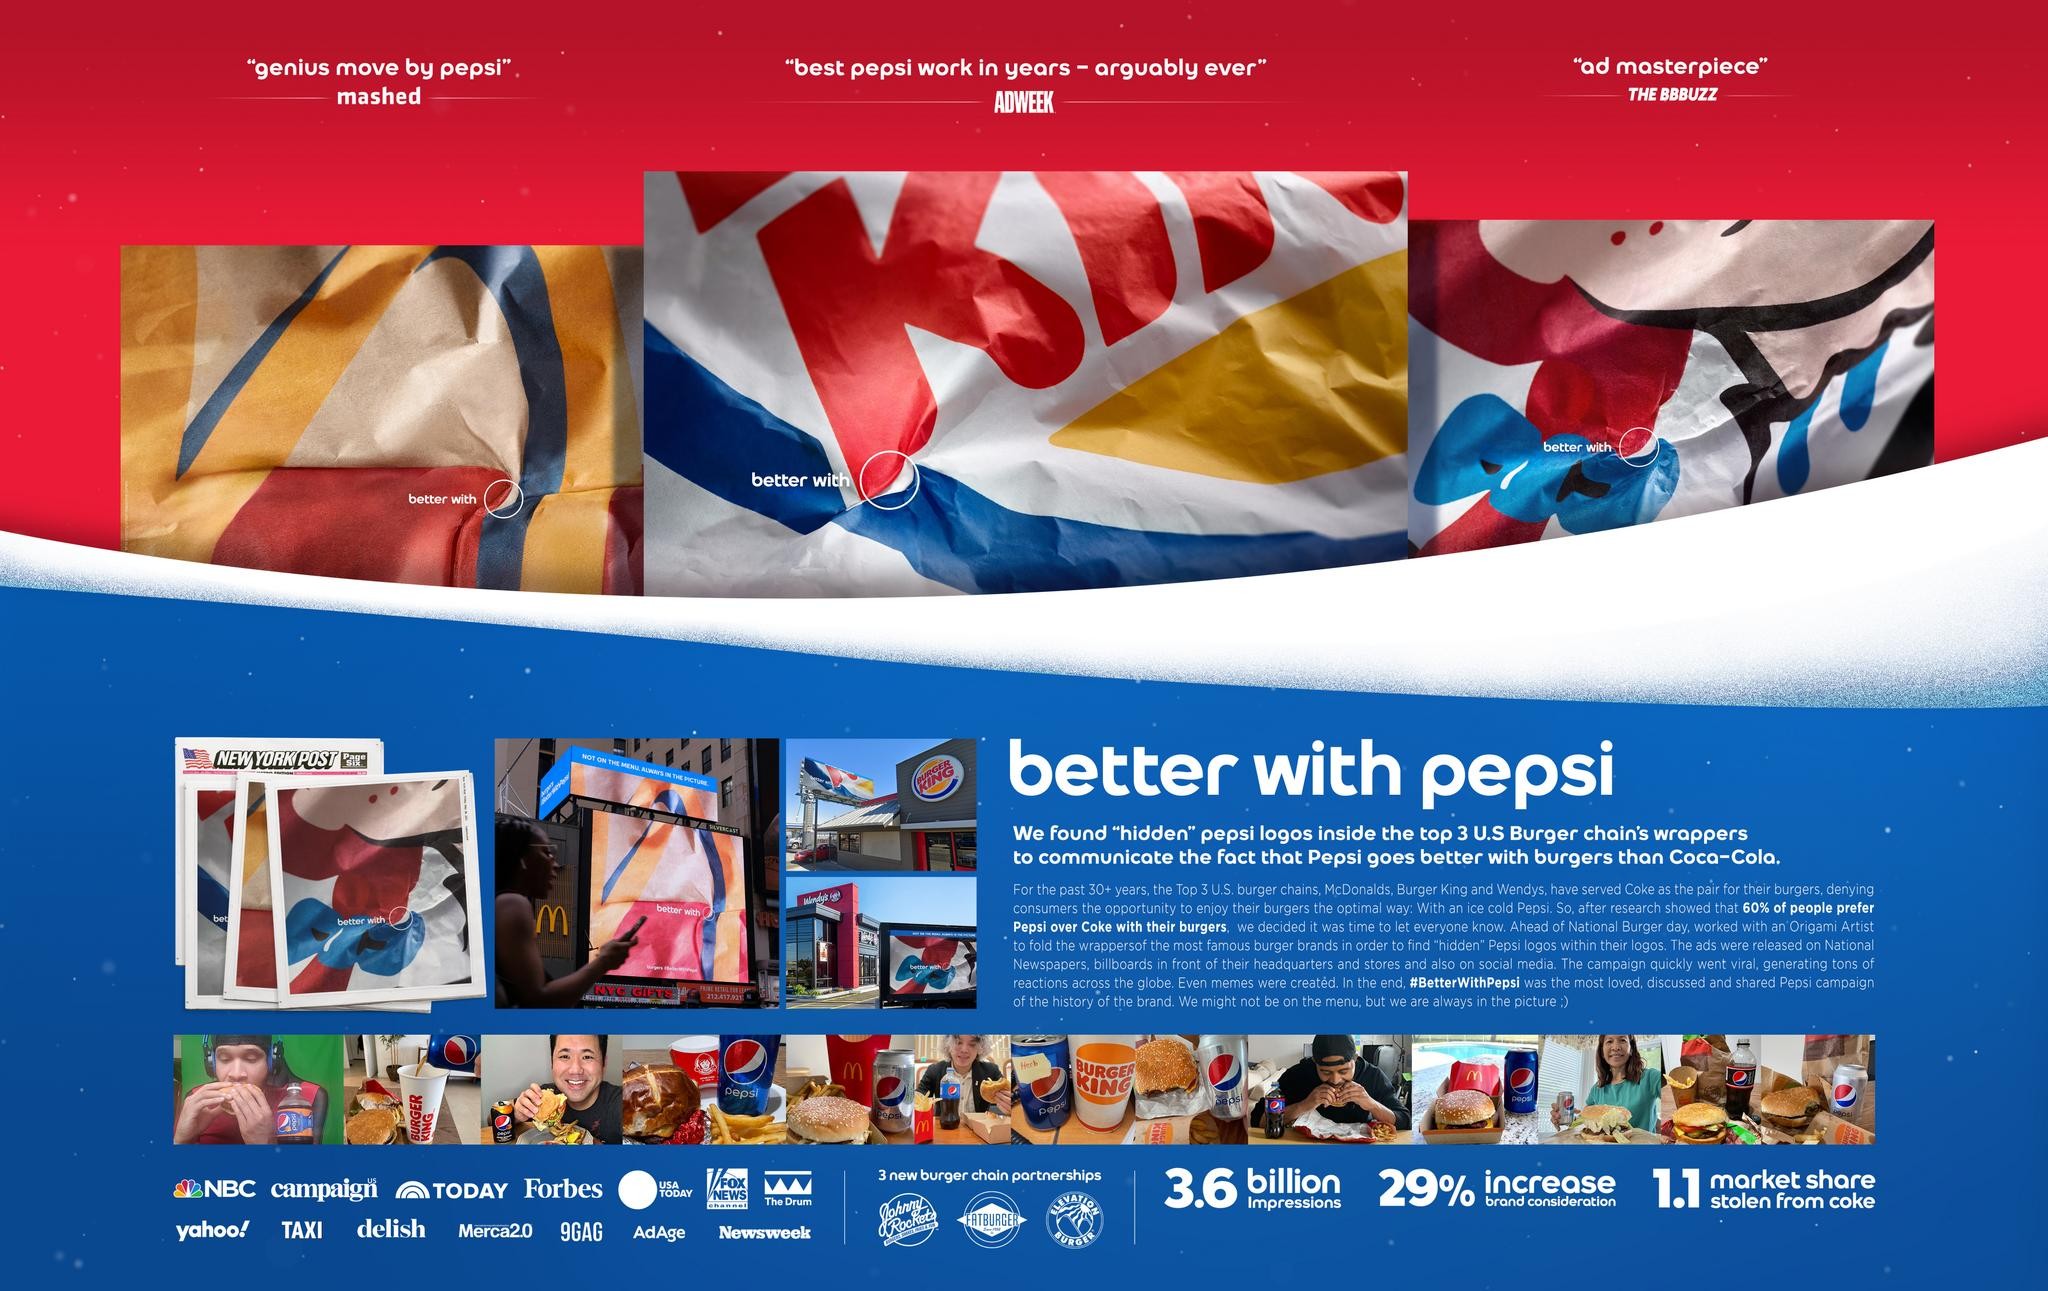 BETTER WITH PEPSI